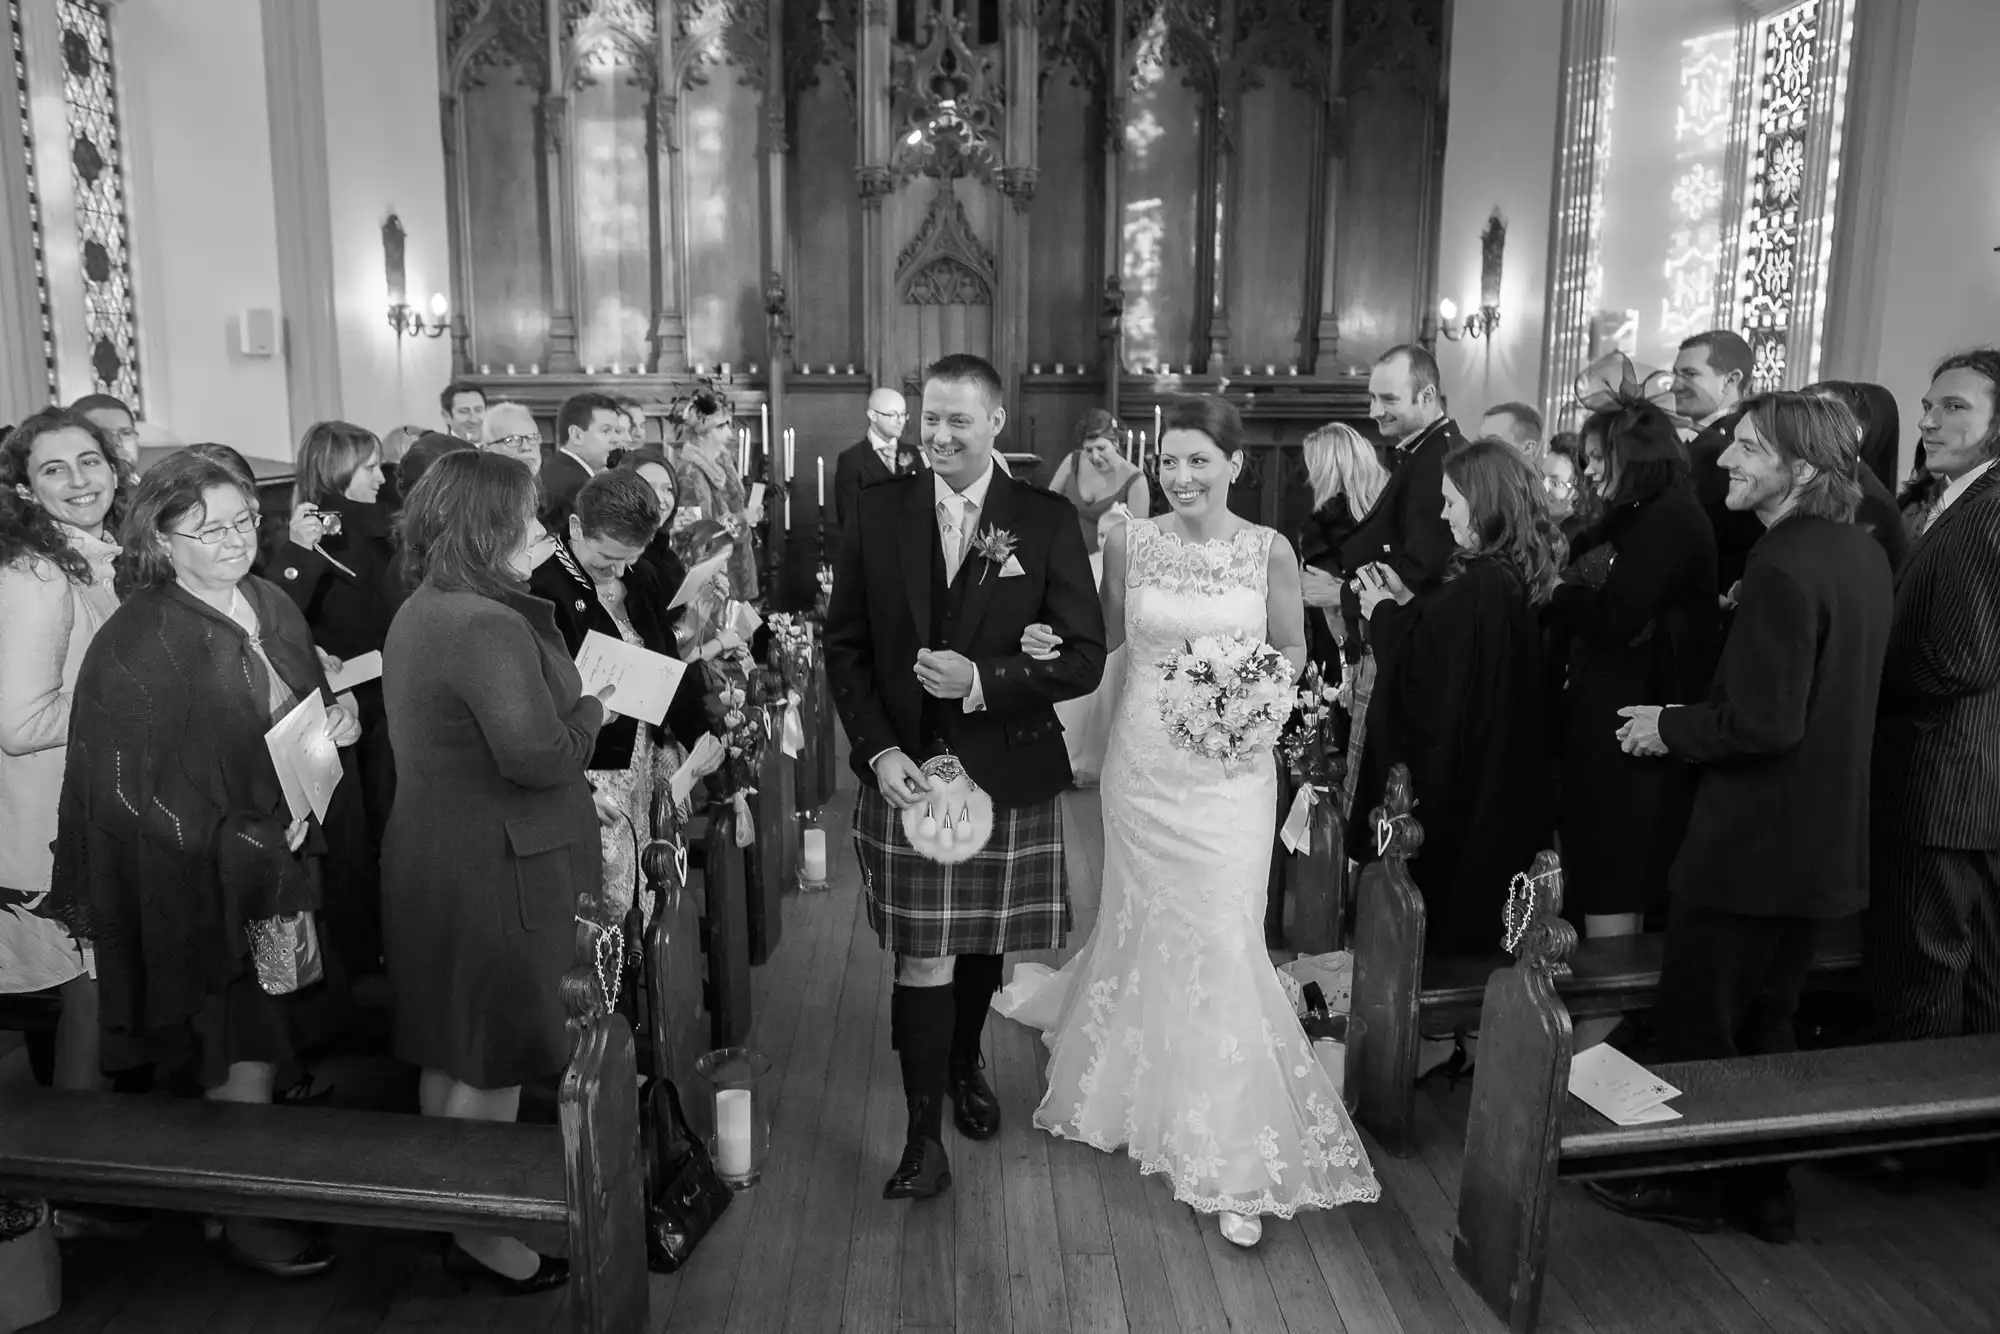 A bride and groom, the groom in a kilt, smiling as they walk down the aisle of a church filled with guests.